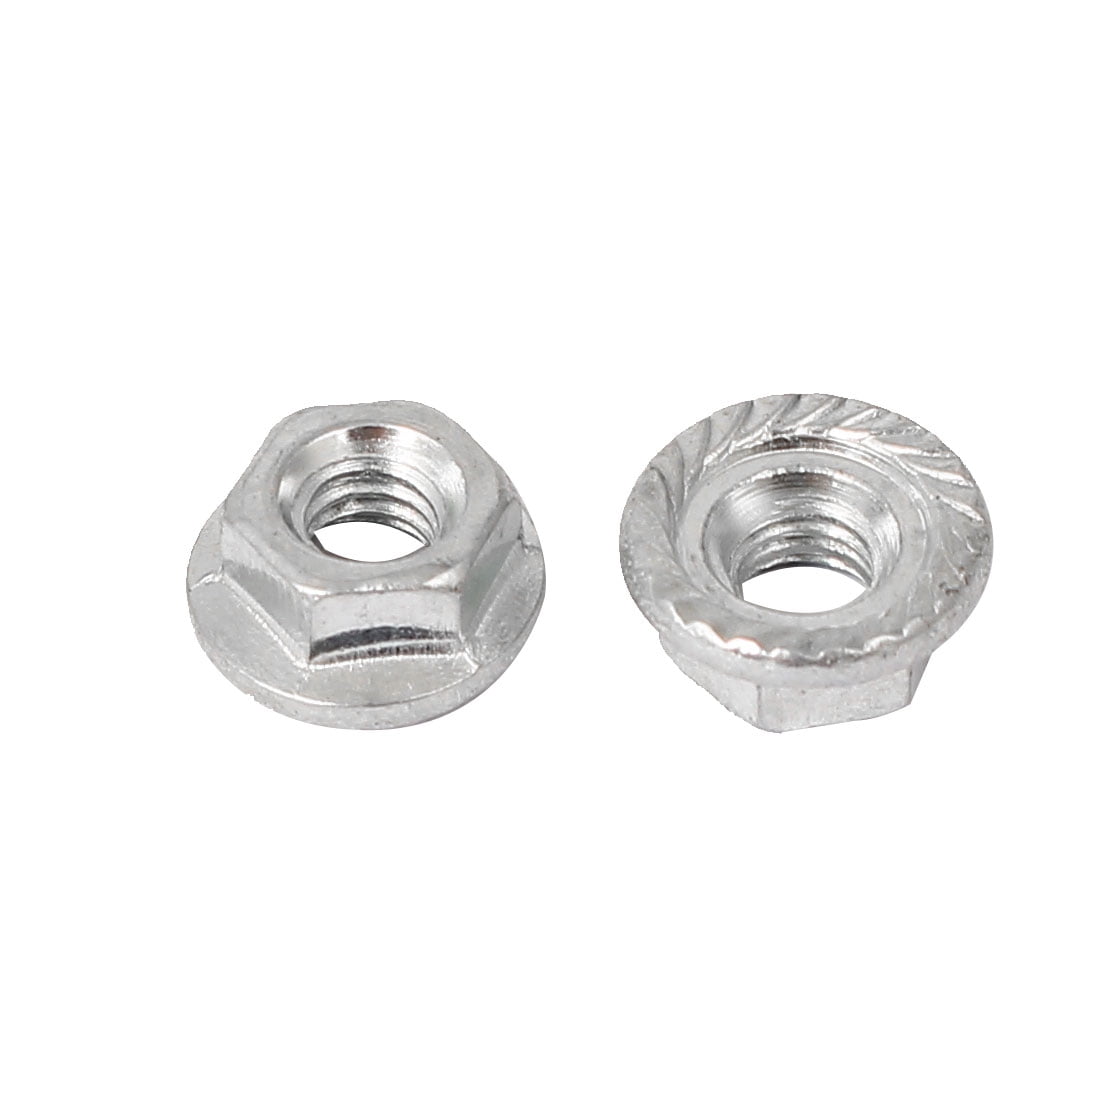 FLANGED NUT A2-70  FLAT M8 8mm X 1.25mm Stainless Steel FLANGE NUTS 